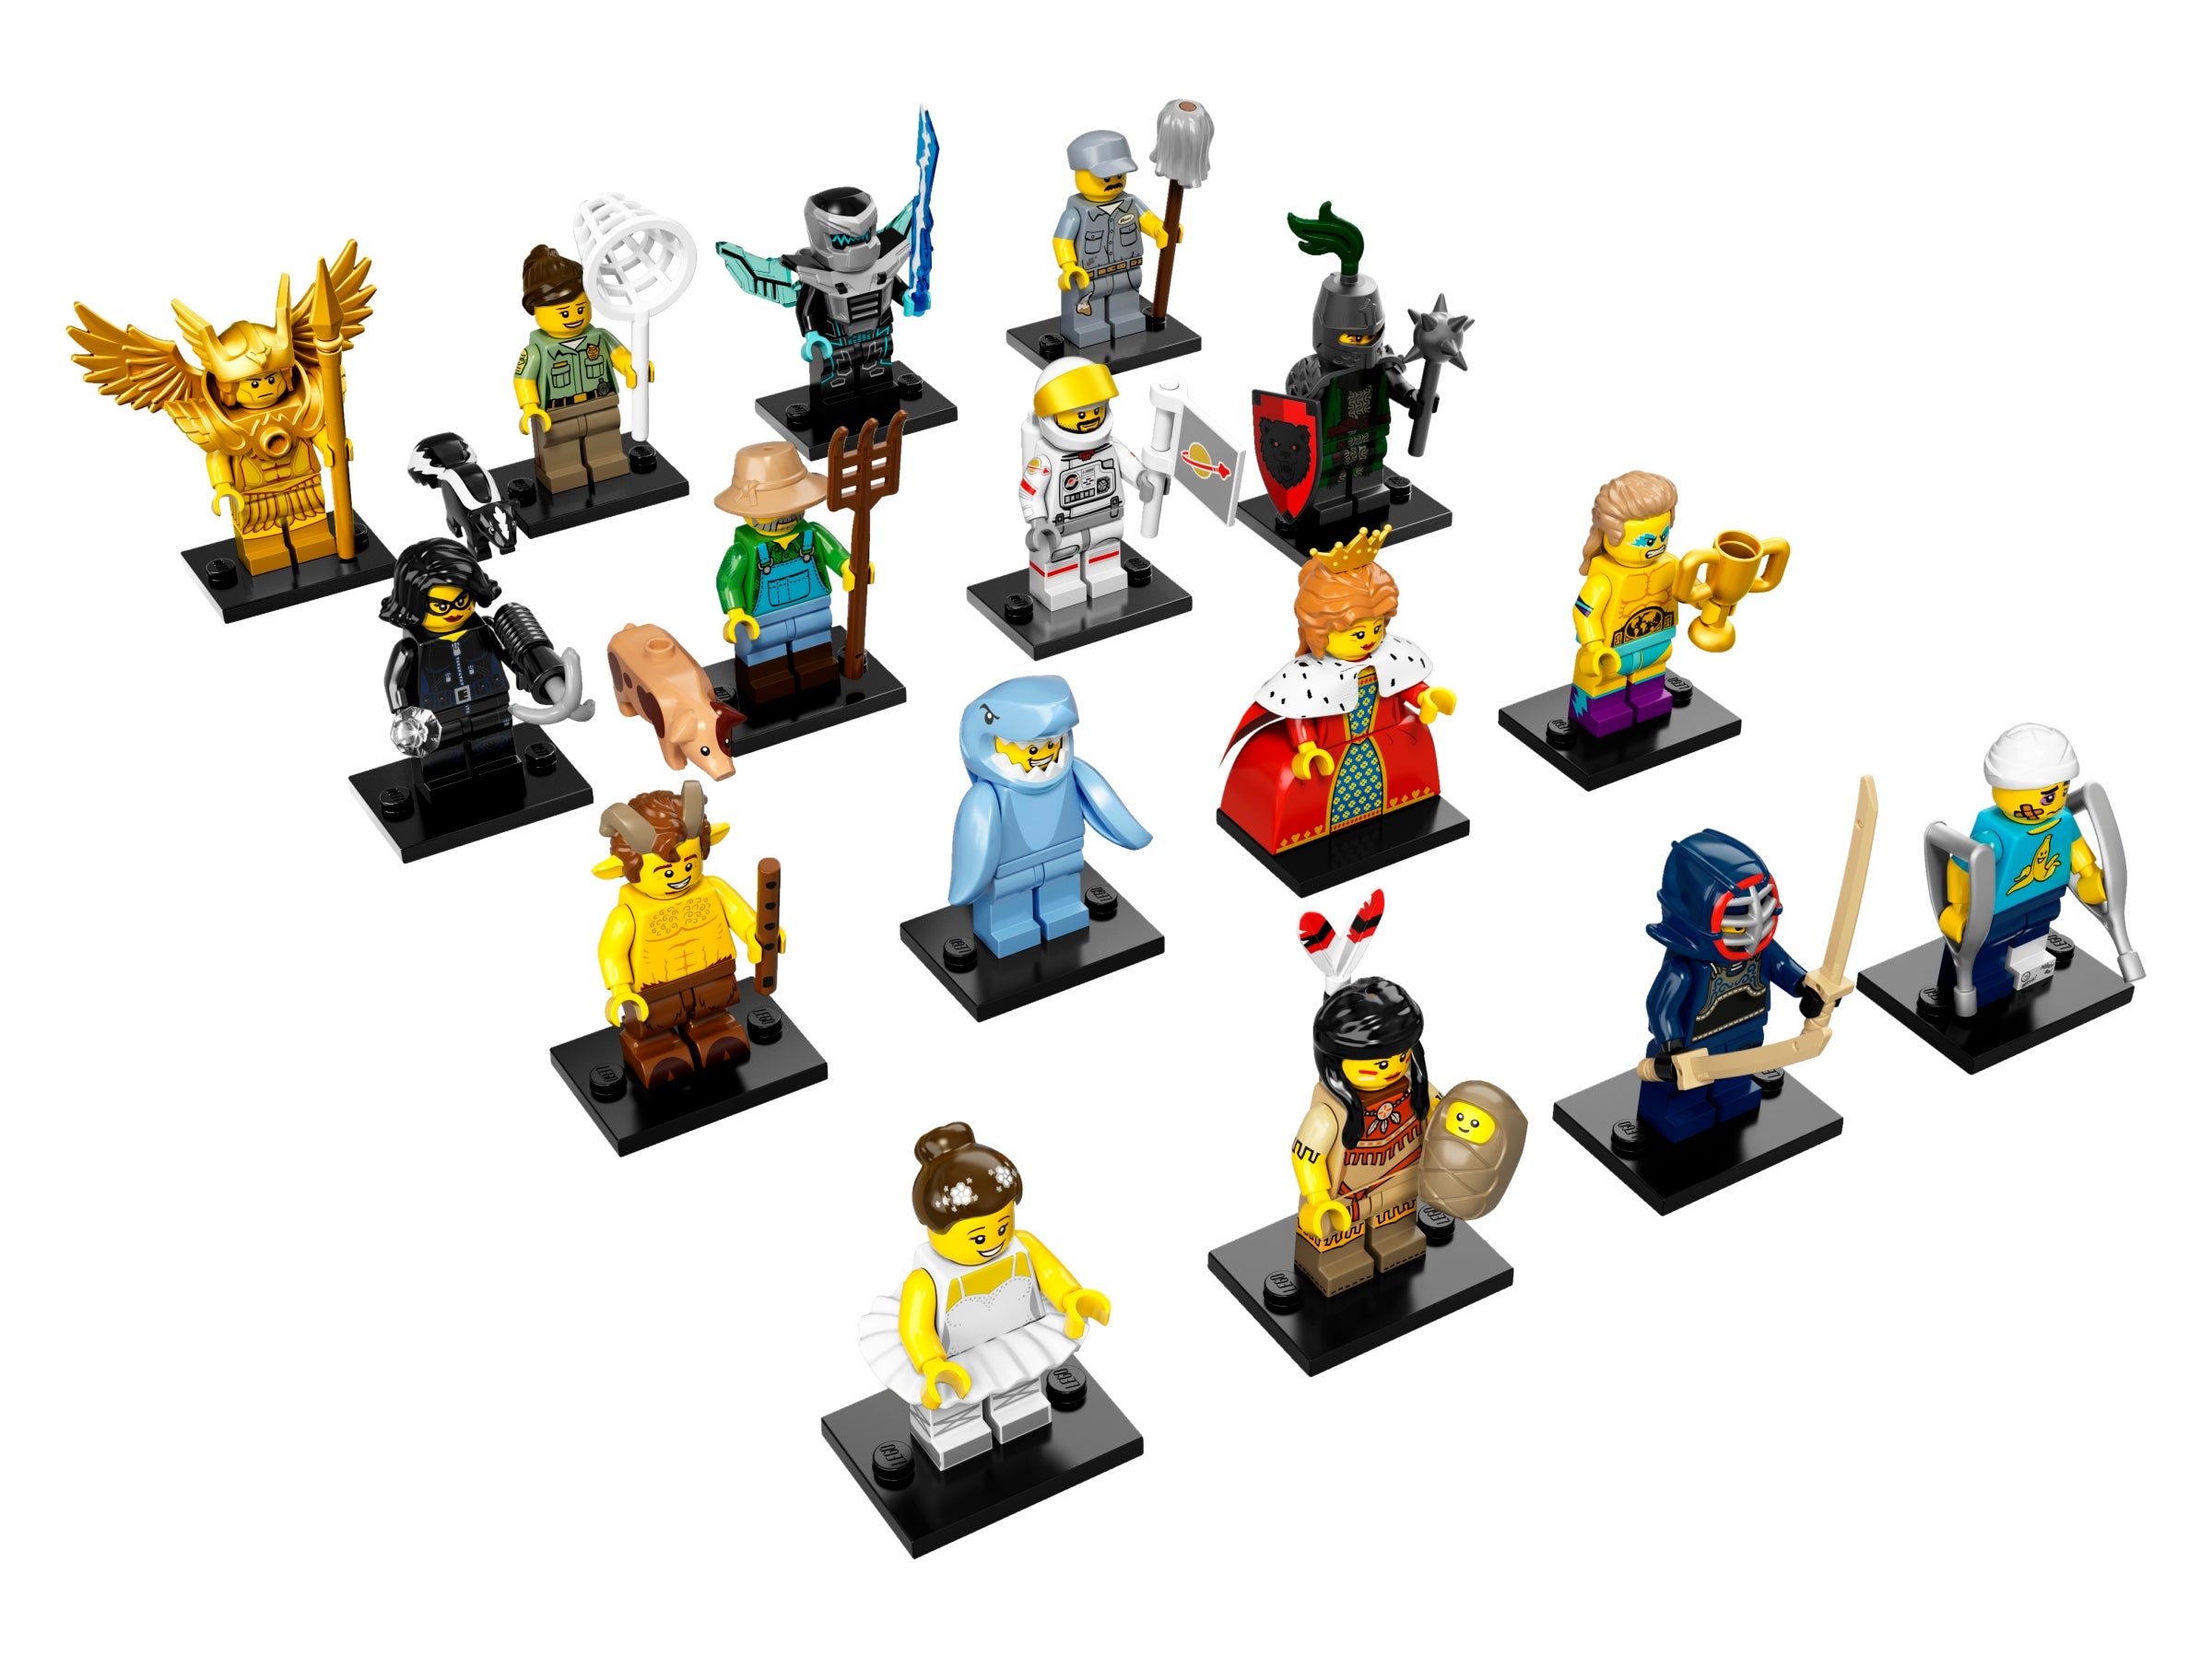 Buy 2 get 3rd FREE Choose Your Minifigures LEGO Minifigures Series 15 71011